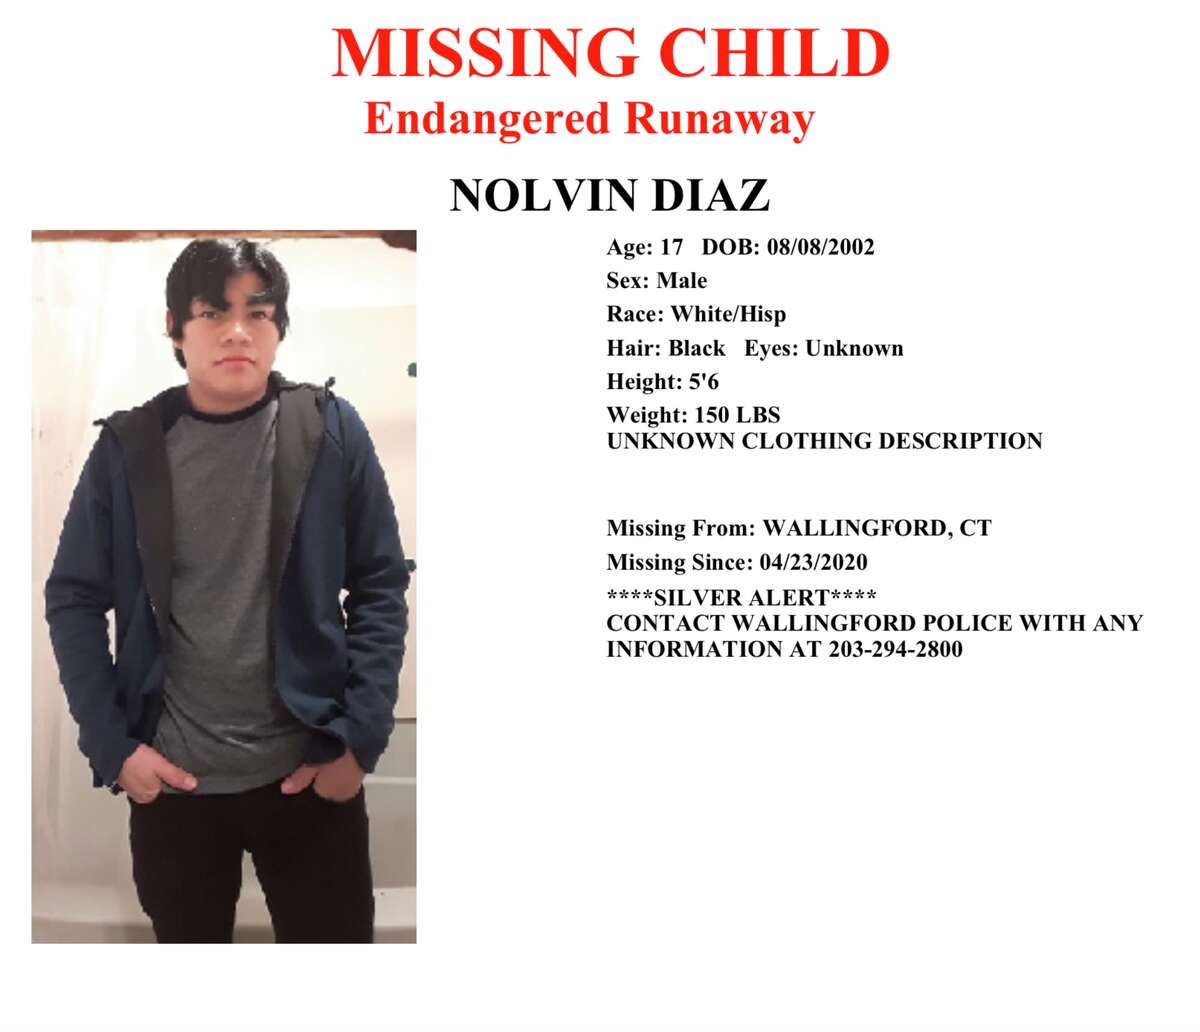 A silver alert issued for Nolvin Diaz before he was found dead.